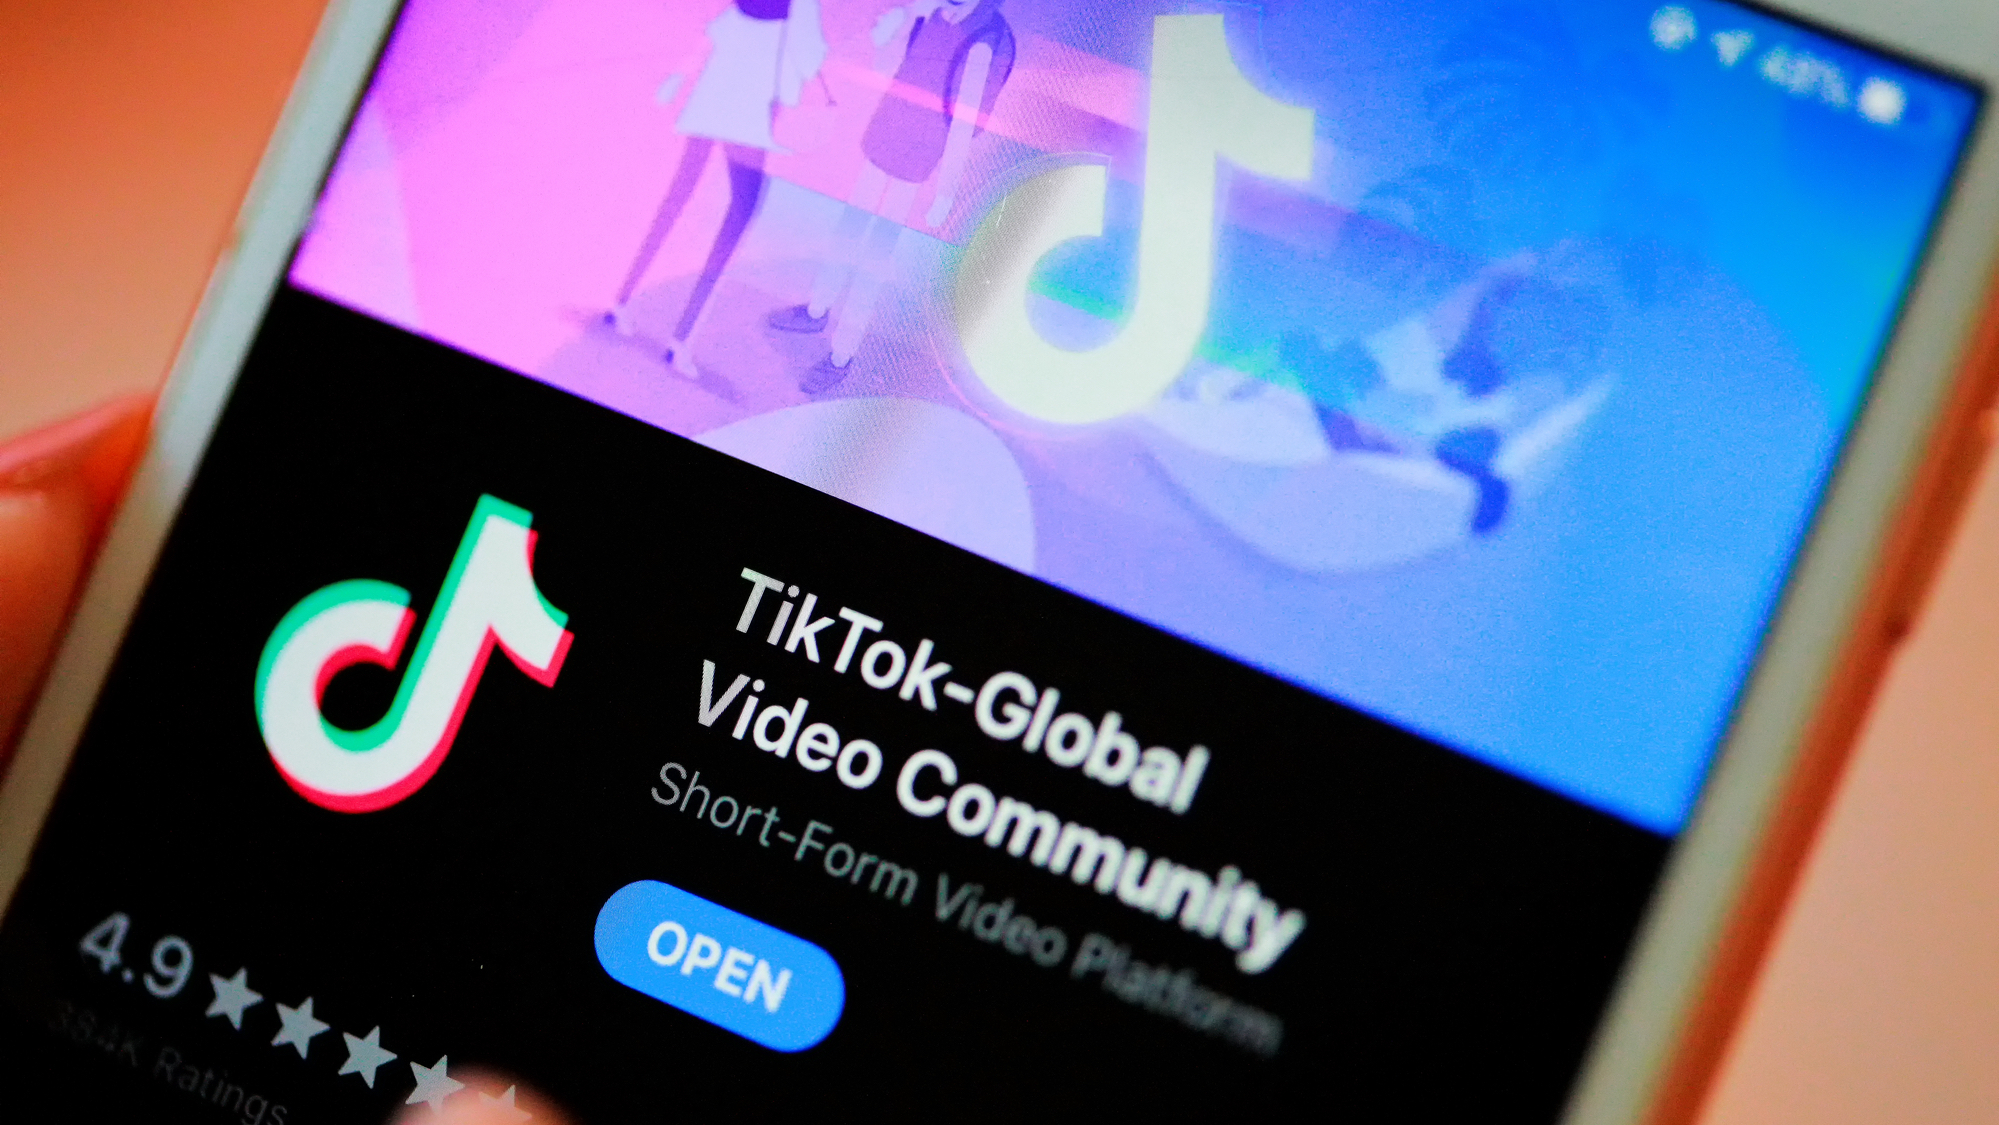 Montana may soon make it illegal to use TikTok in the state